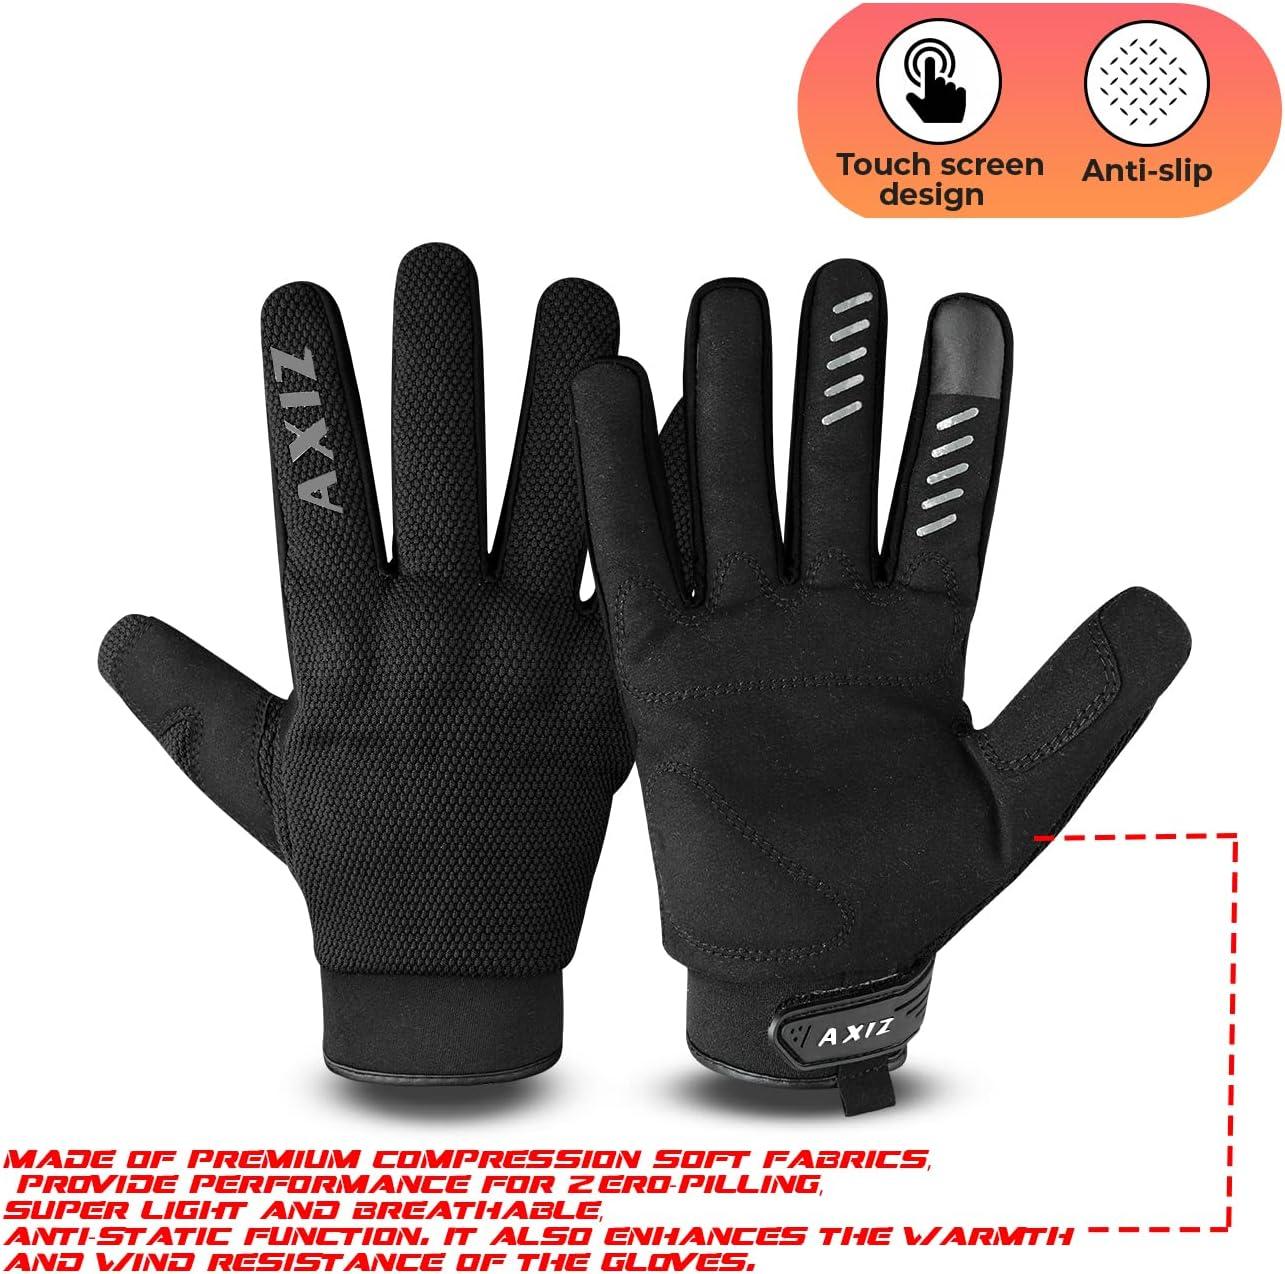 Types of wheelchair racing gloves a = soft style racing glove